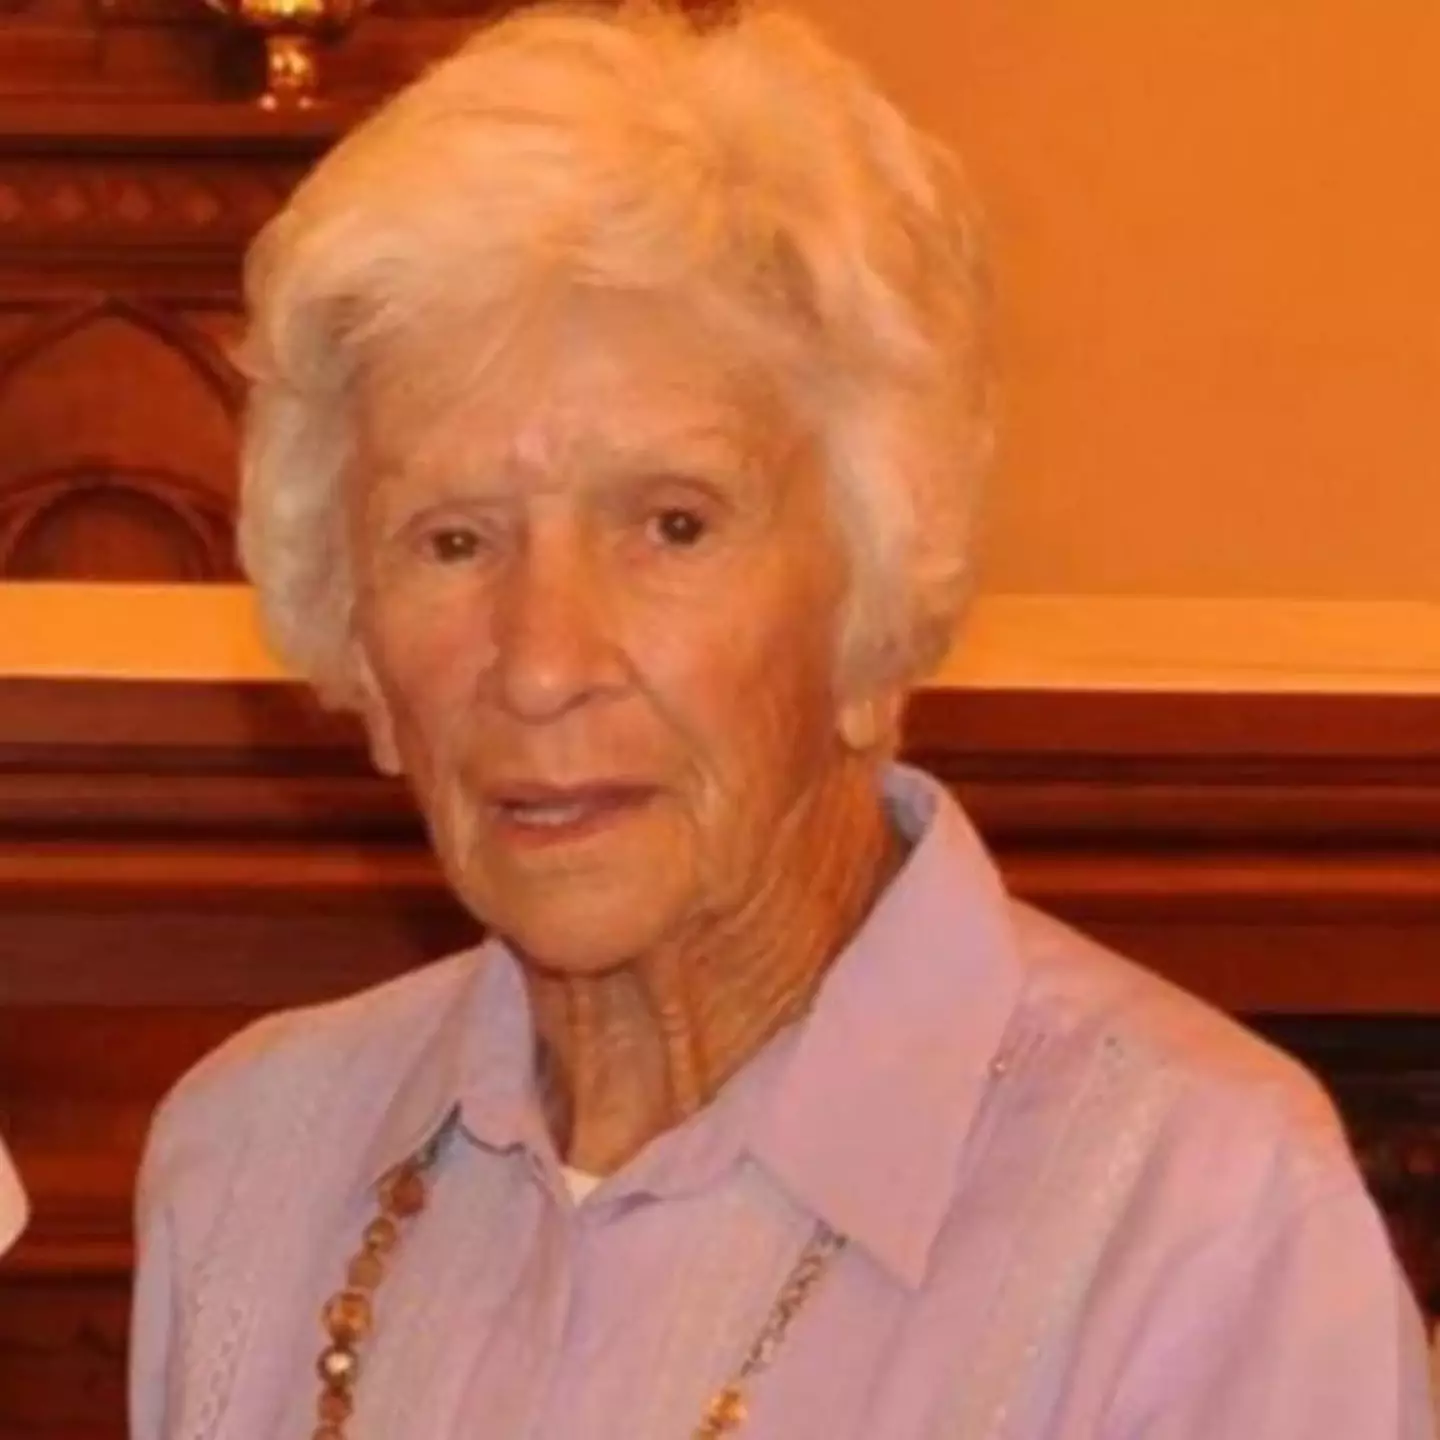 Clare Nowland, 95, was tasered by police.